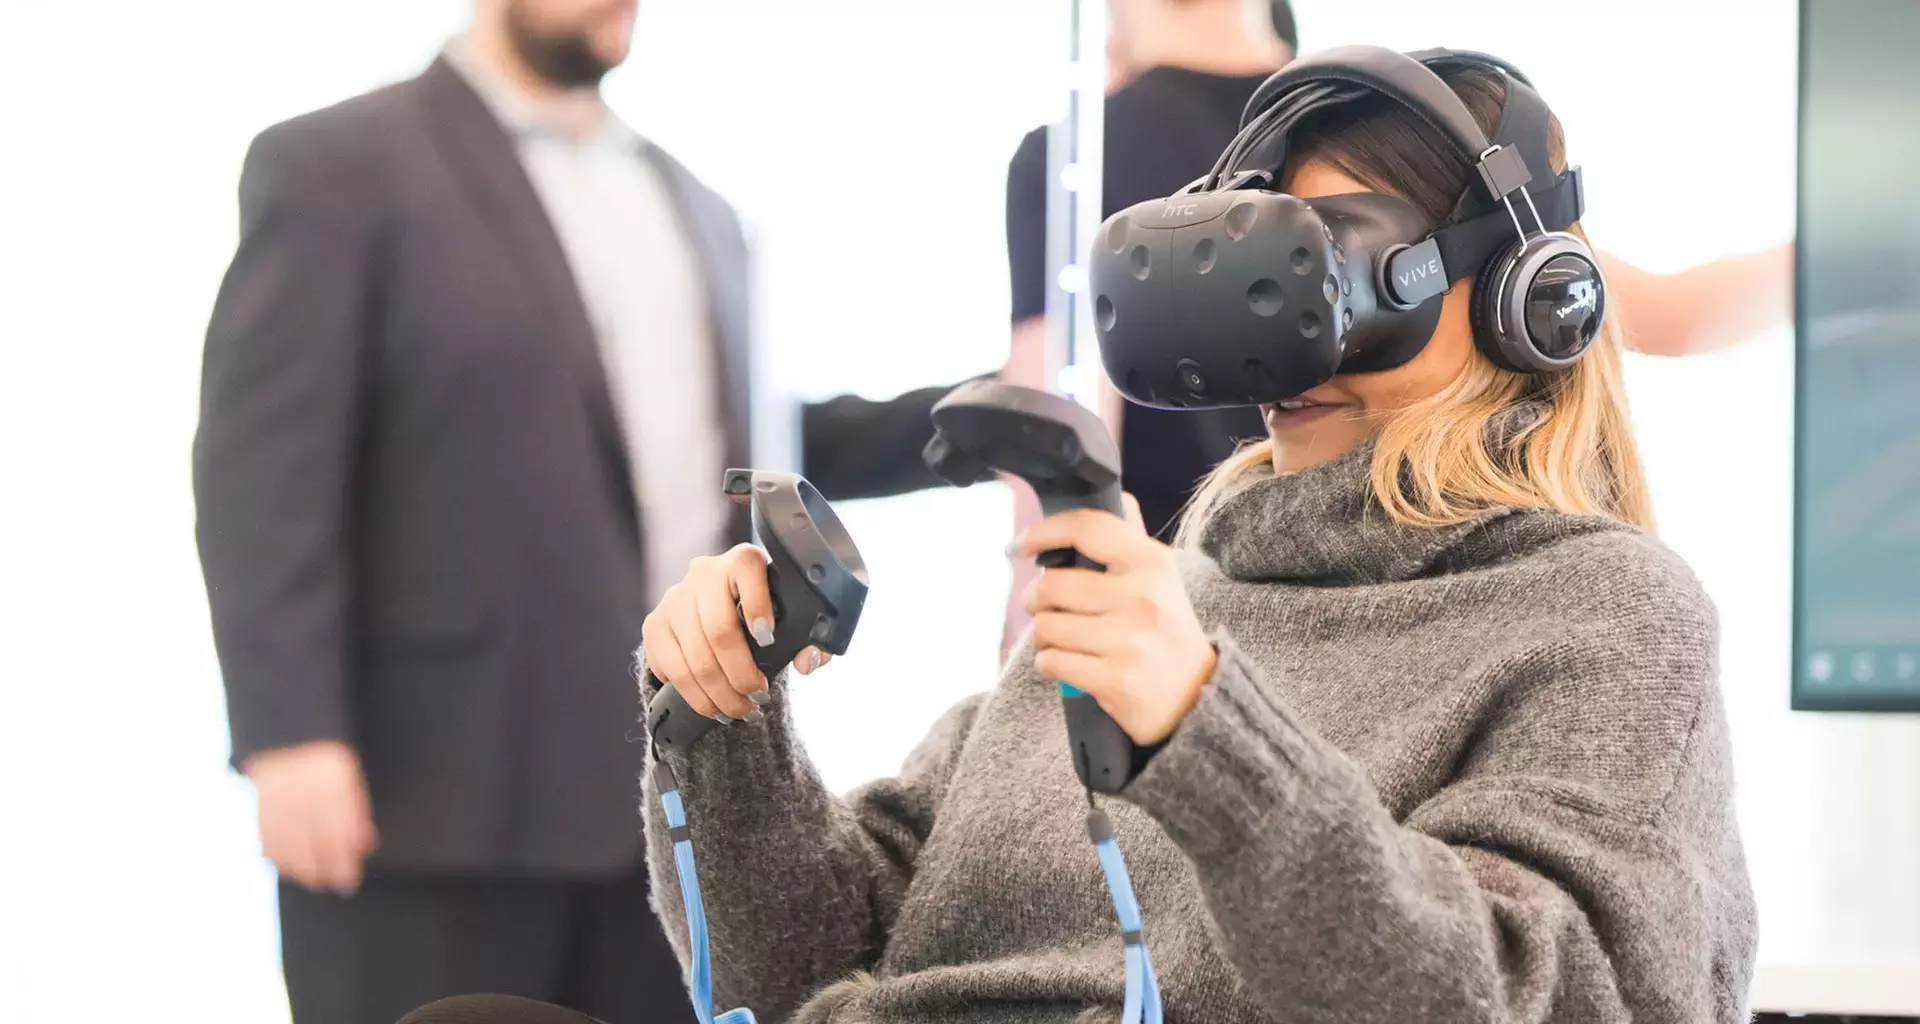 The future has arrived! Tec holds classes via collaborative VR